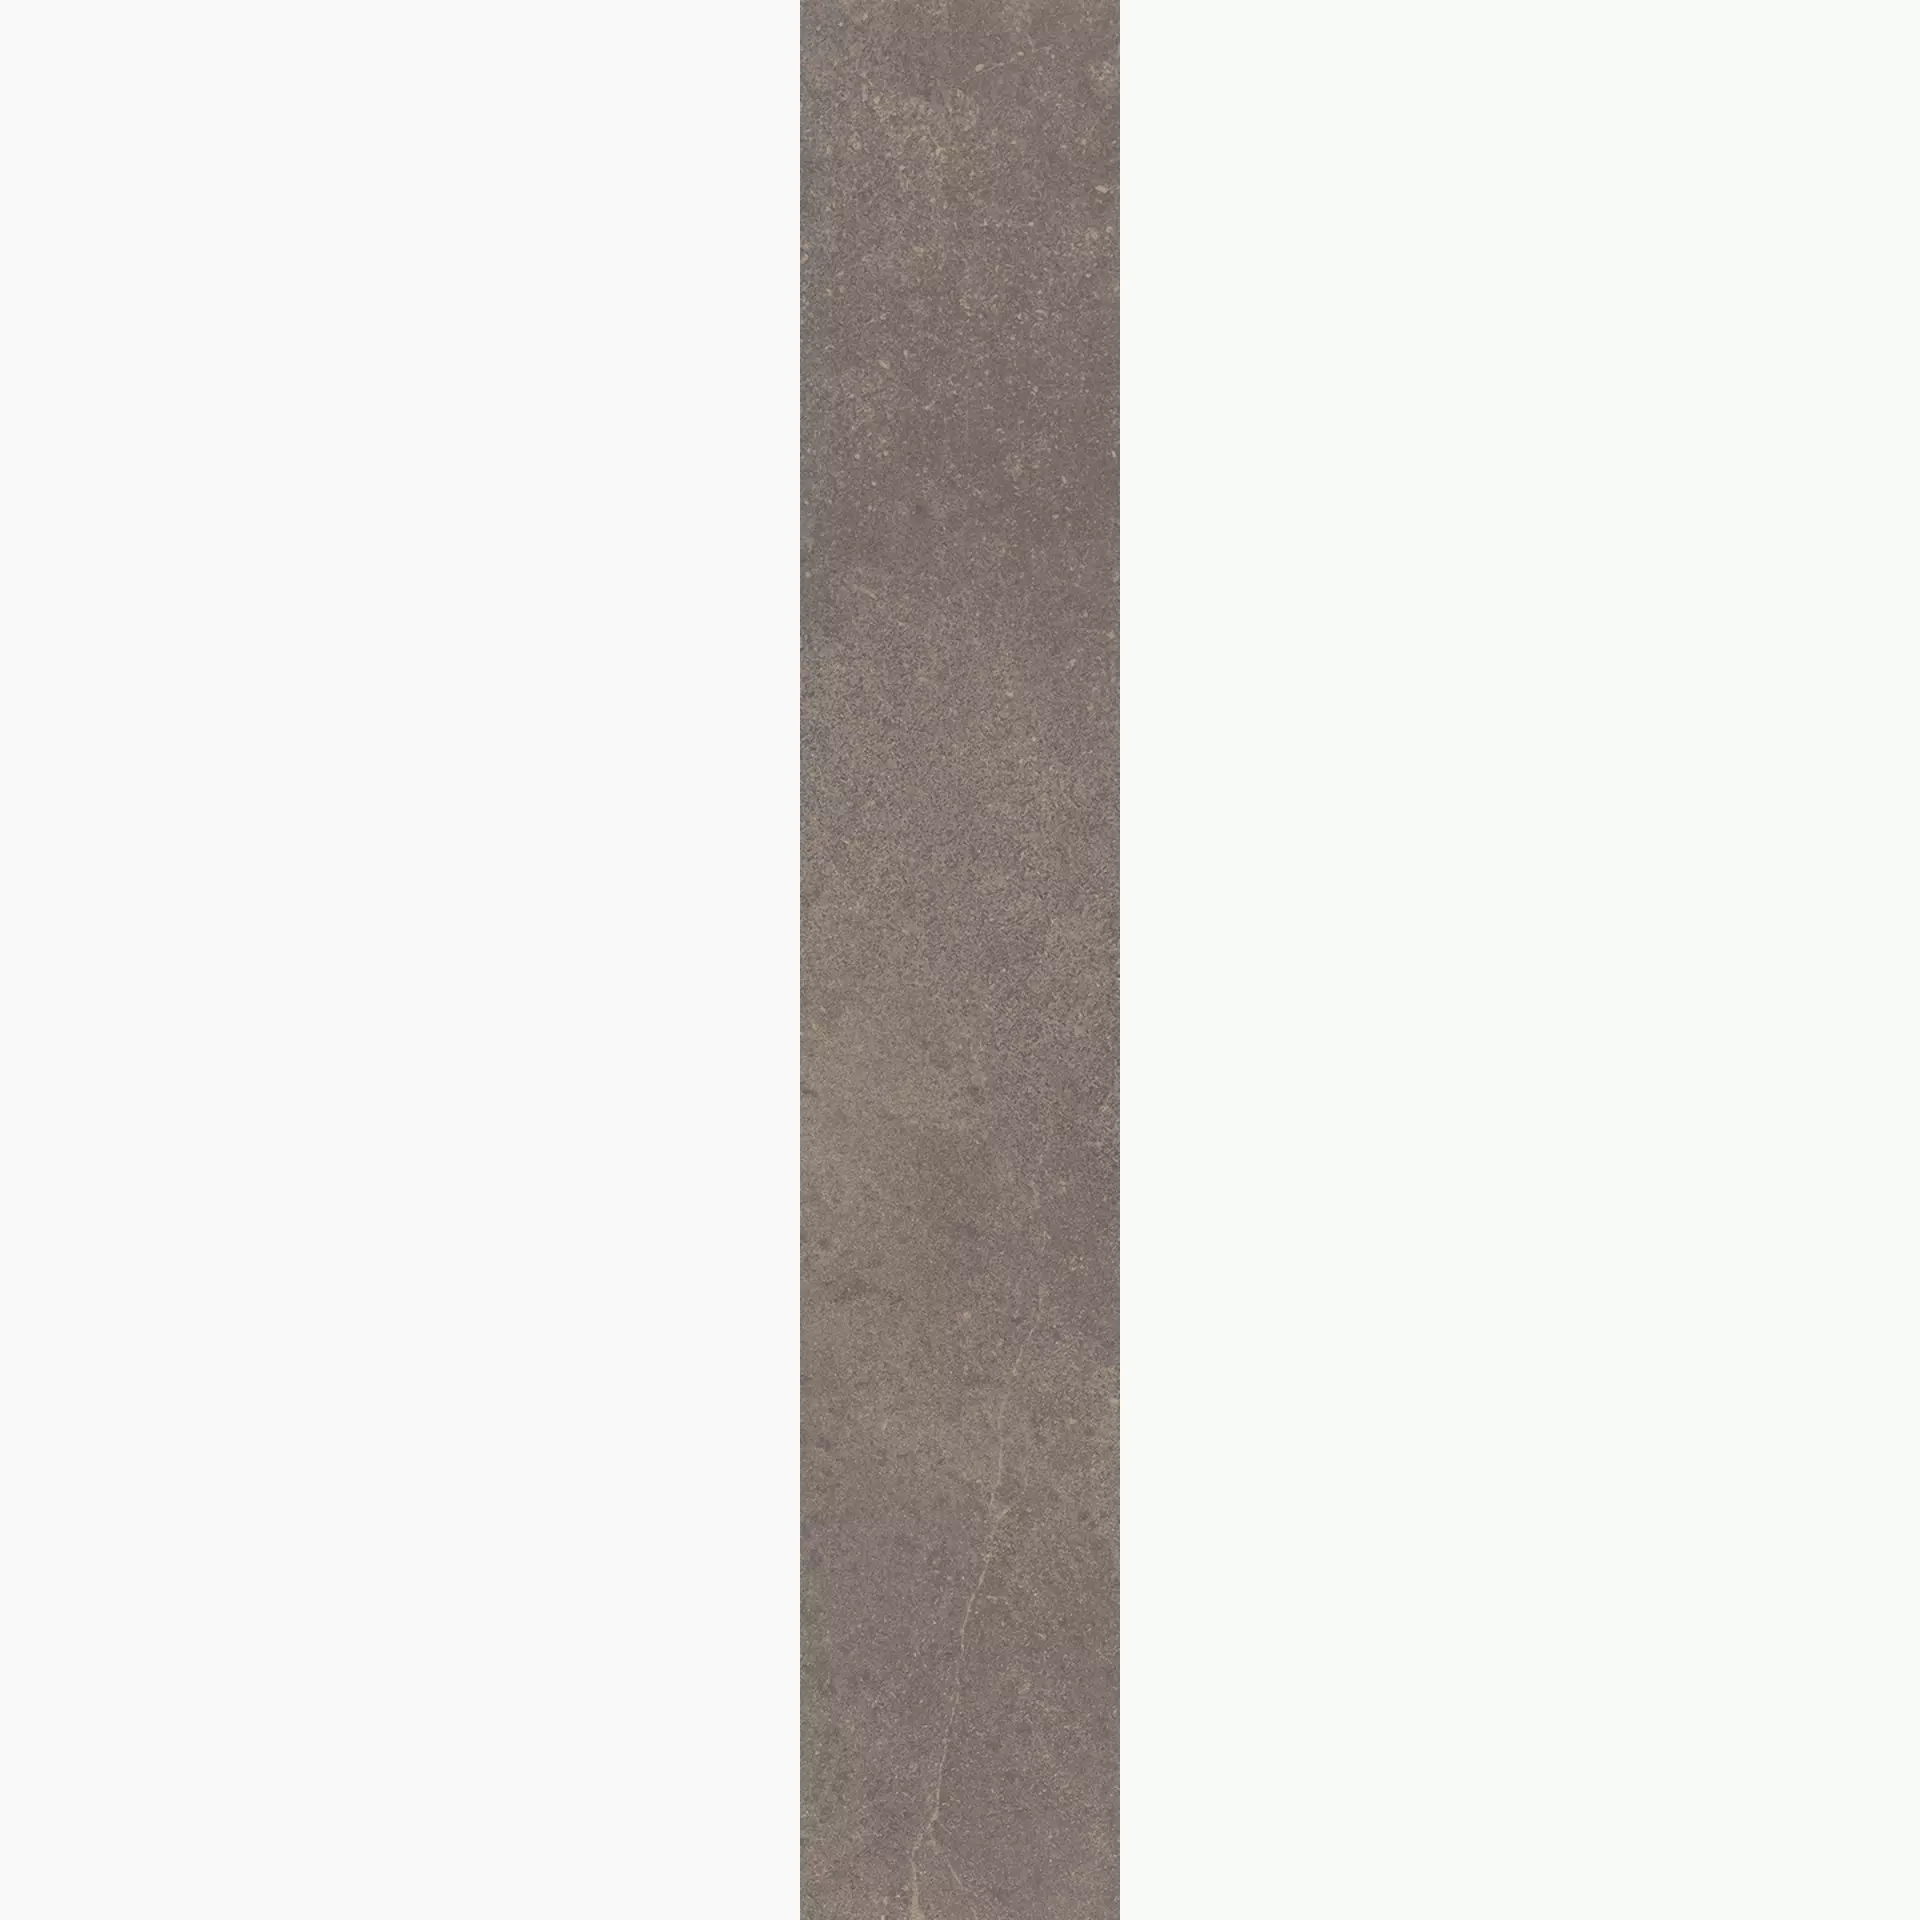 Fondovalle Planeto Mars Natural PNT279 20x120cm rectified 8,5mm